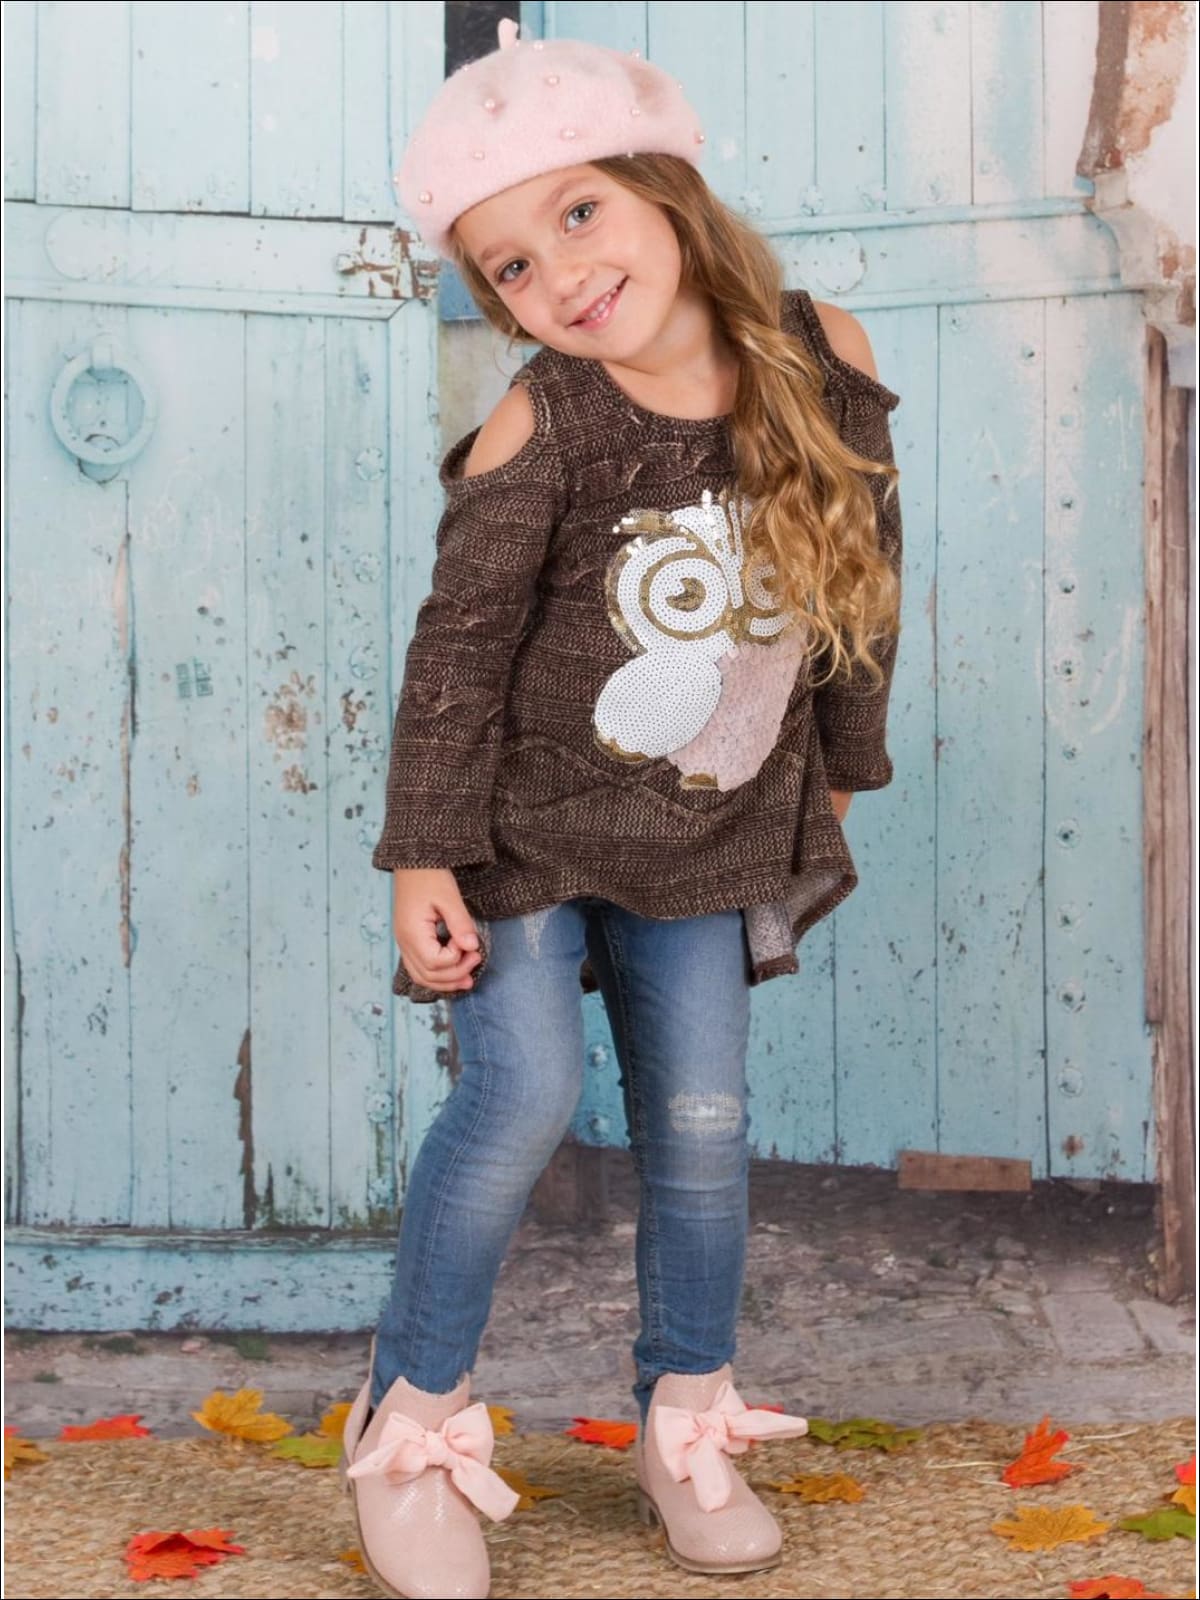 Girls Brown Hi-Lo Long Sleeve Cold Shoulder Cable Knit Tunic with Sequin Owl Applique - Girls Fall Top